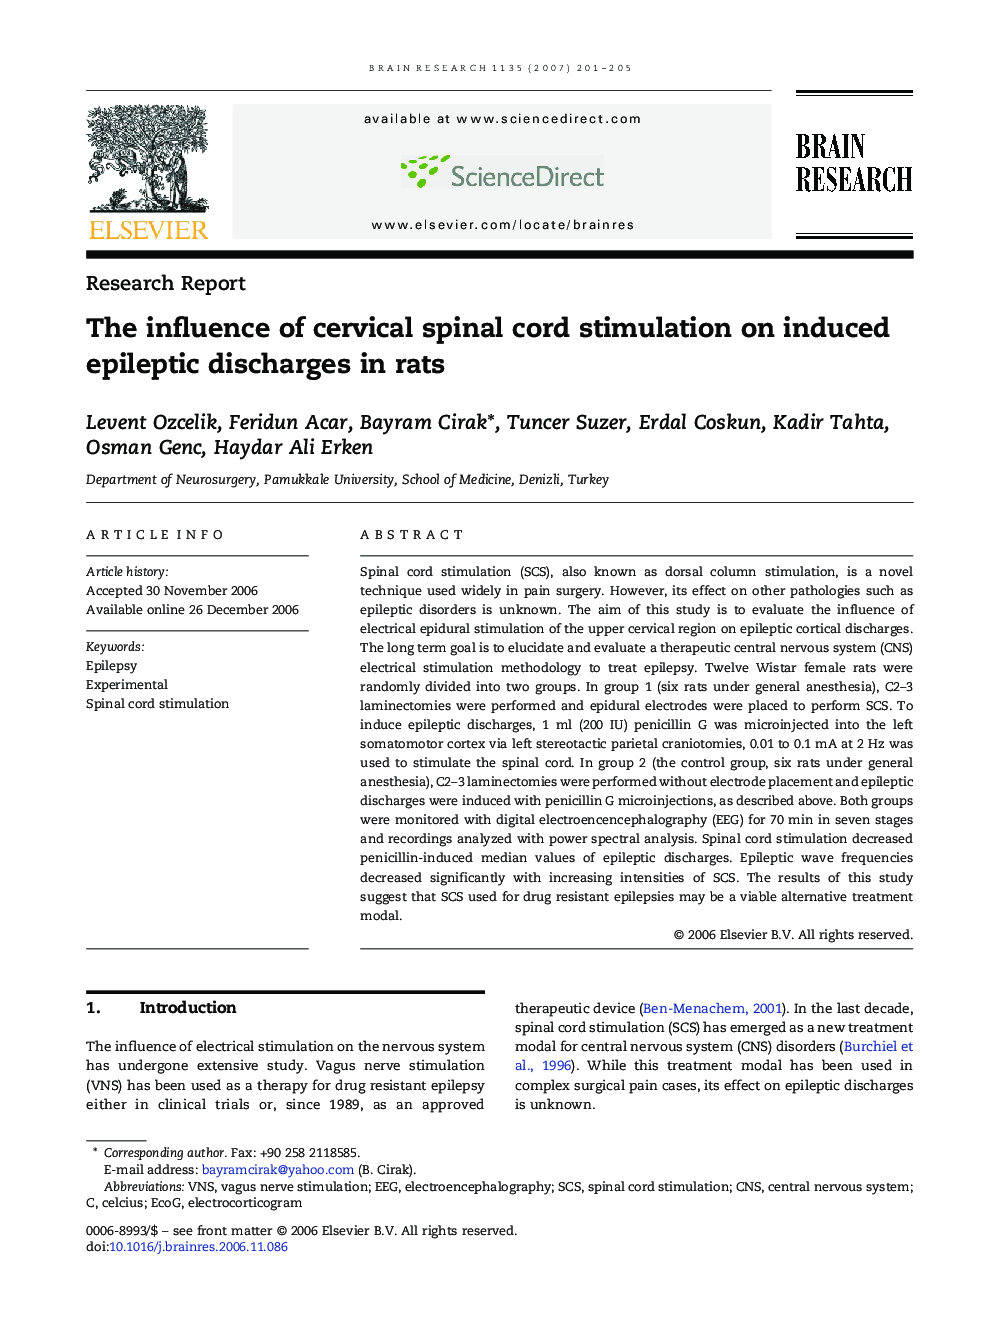 Research ReportThe influence of cervical spinal cord stimulation on induced epileptic discharges in rats